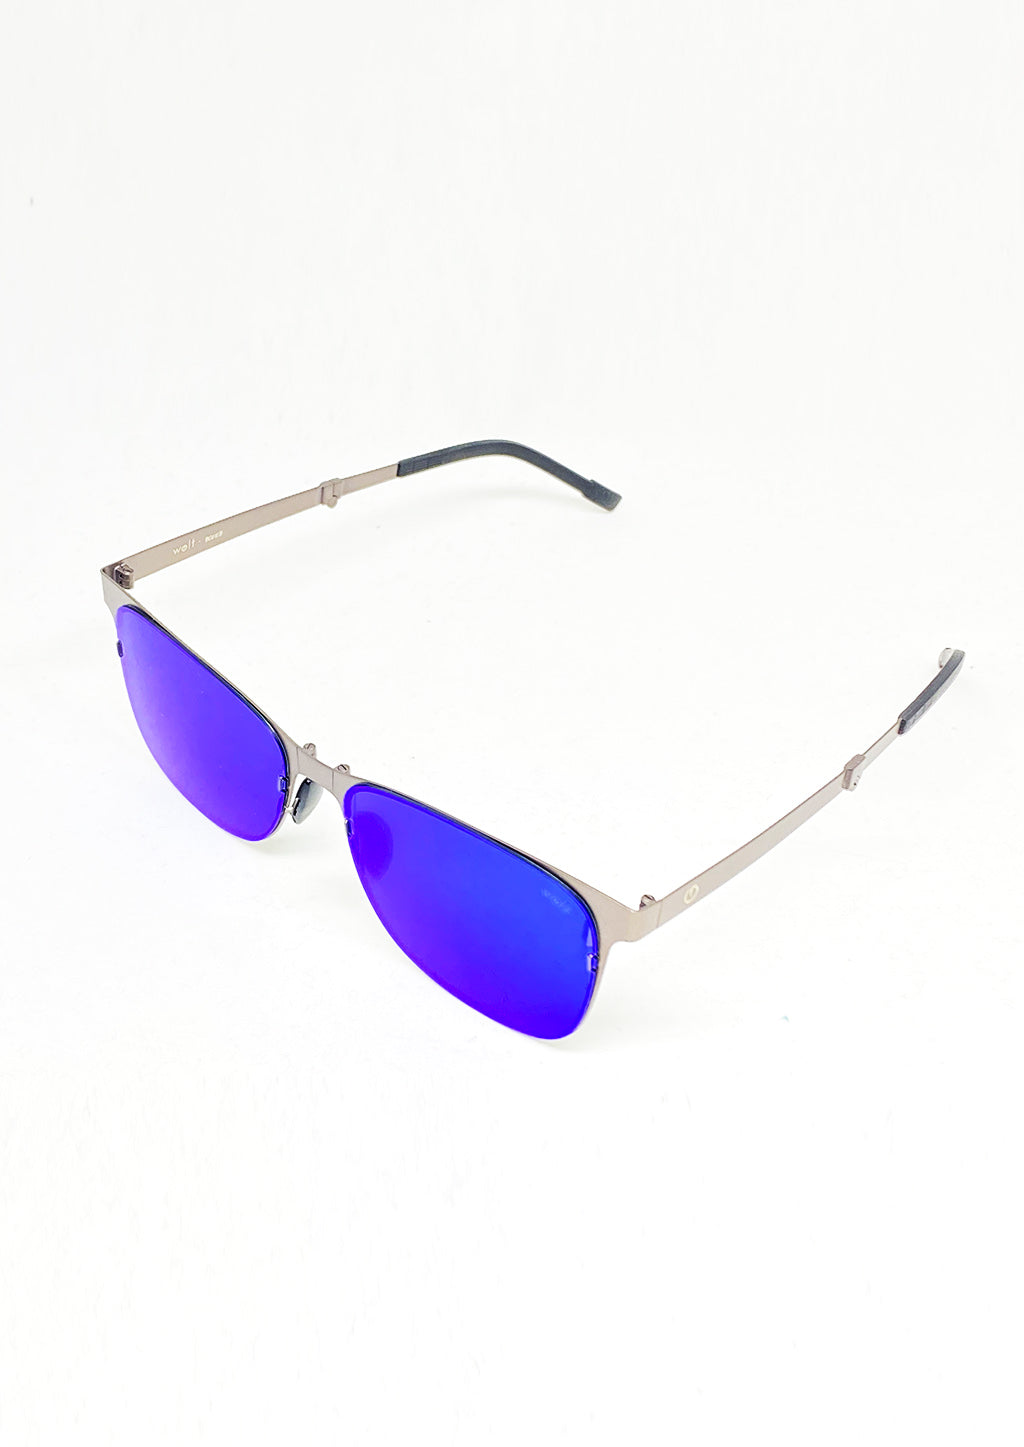 Foldable sunglasses - Rover classic wayfarer design - From the side with blue lenses.